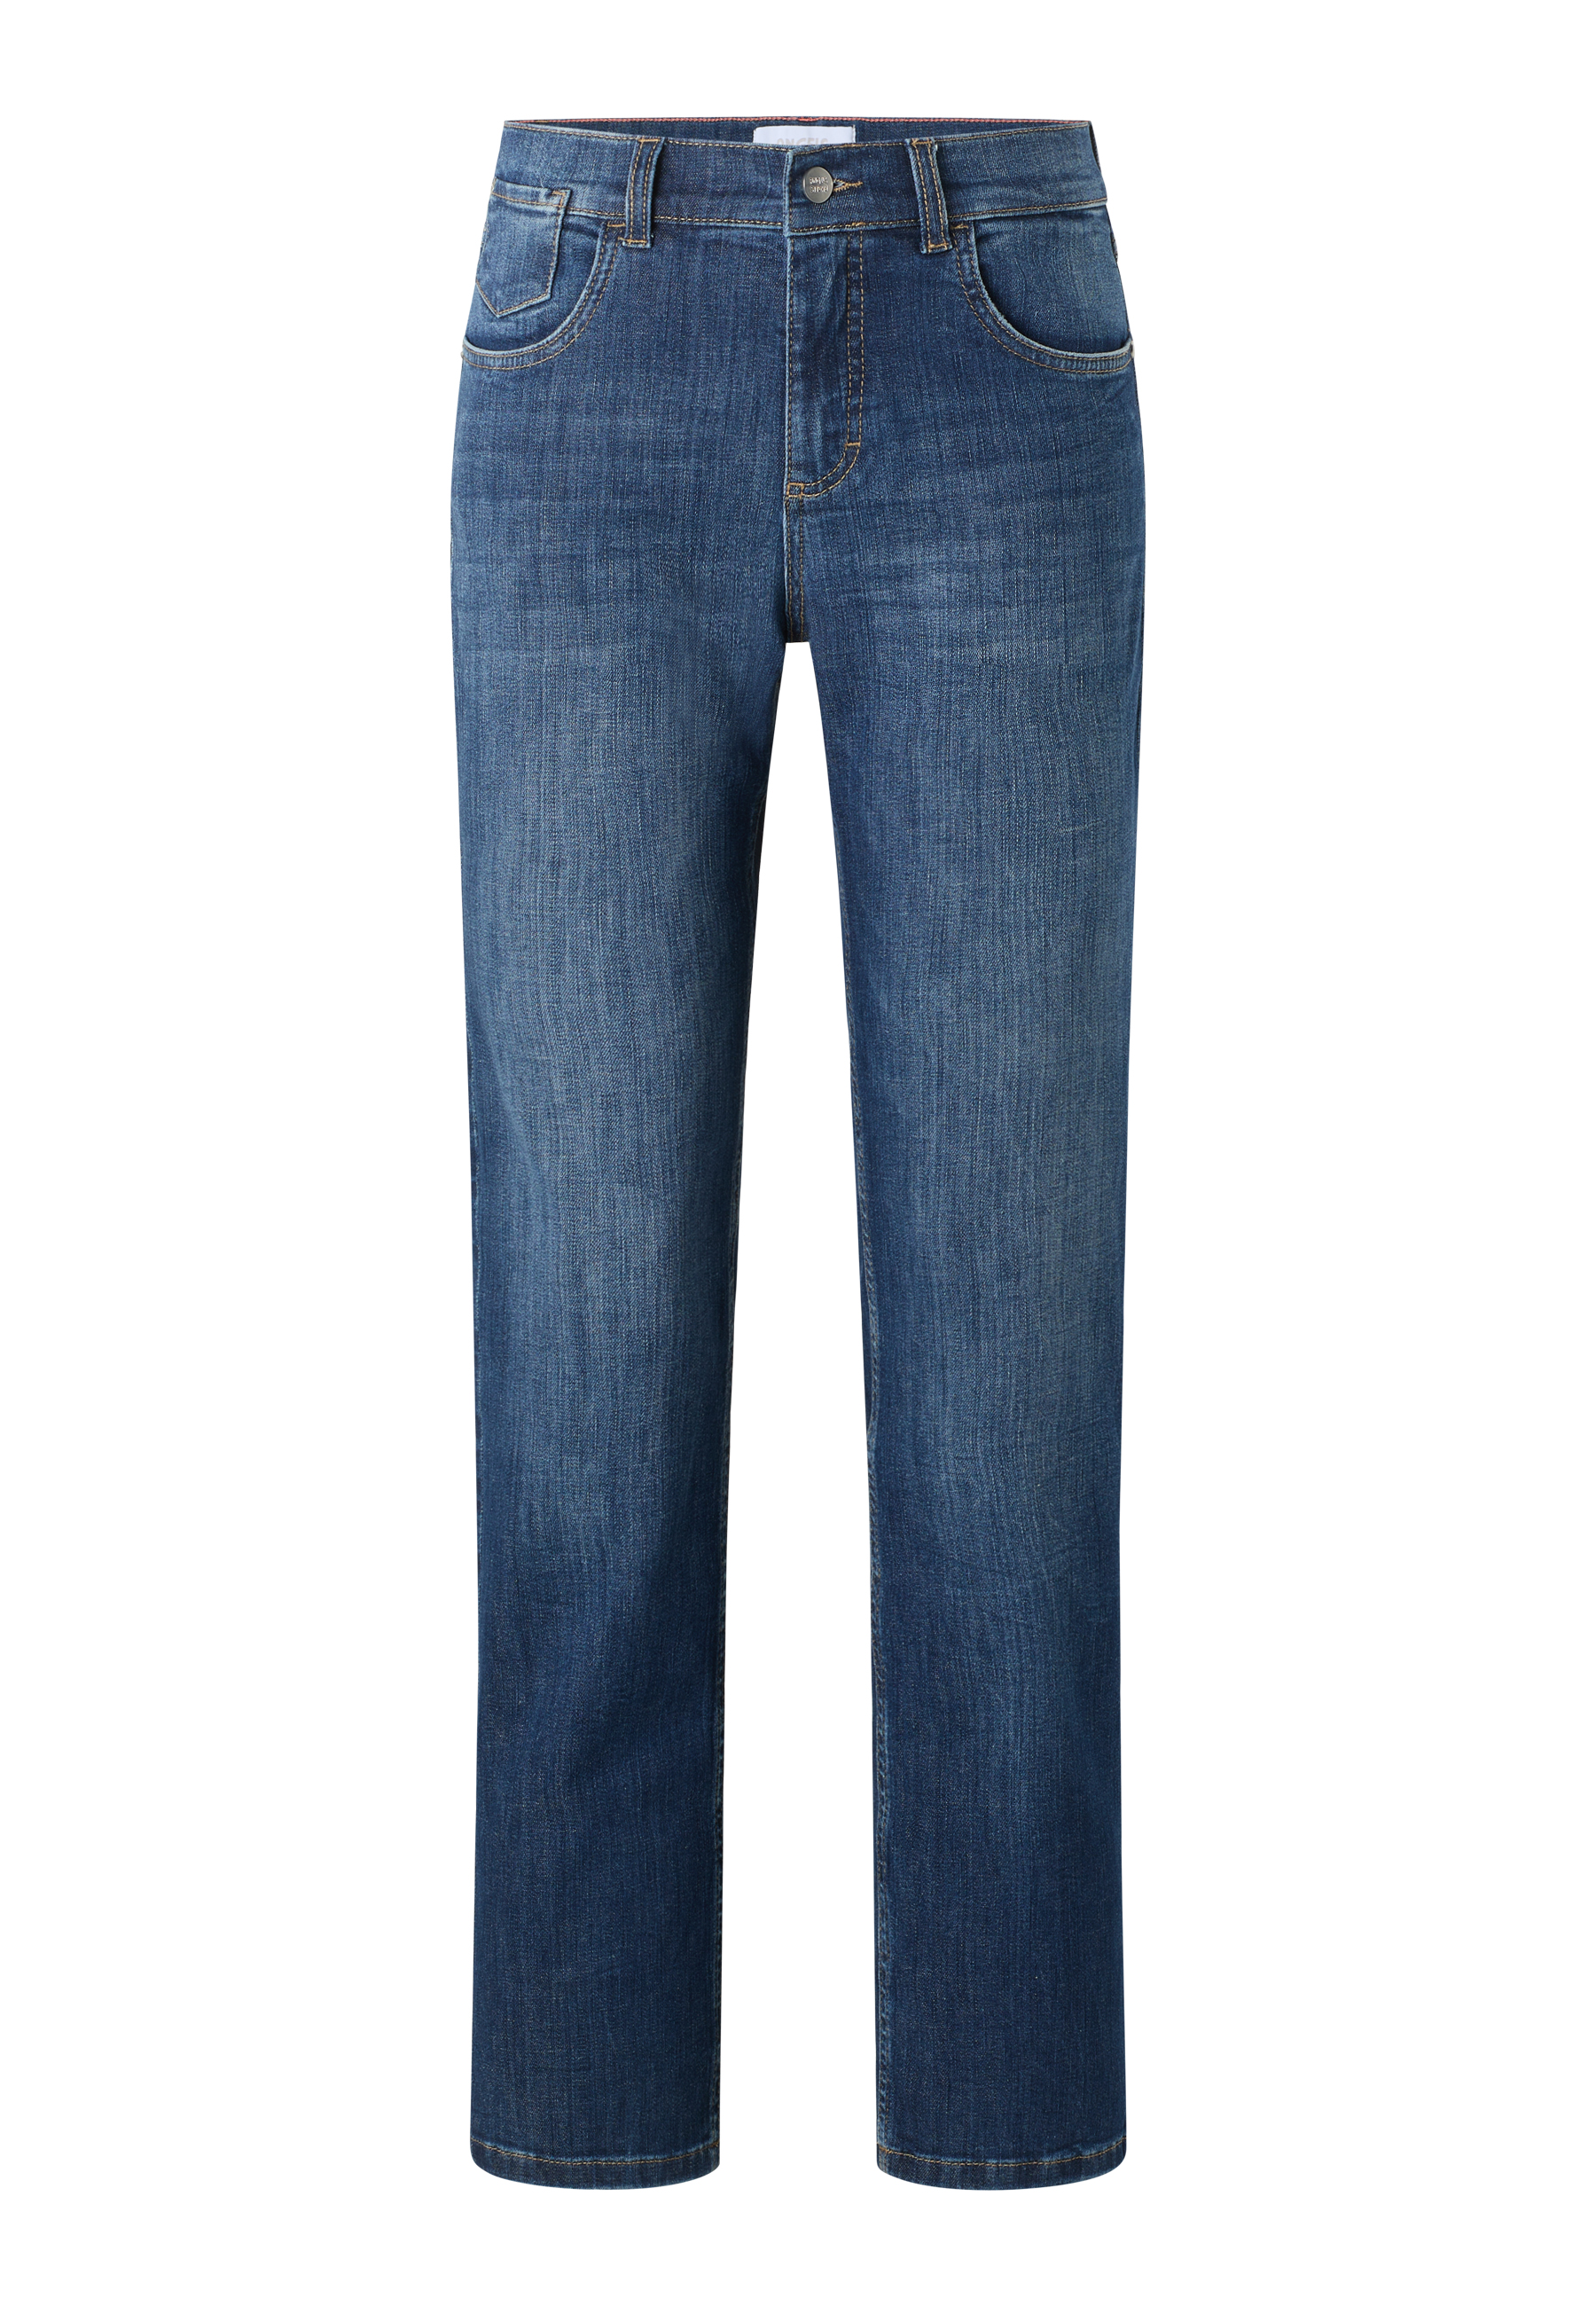 Angels Damen Jeans straight - mid blue used